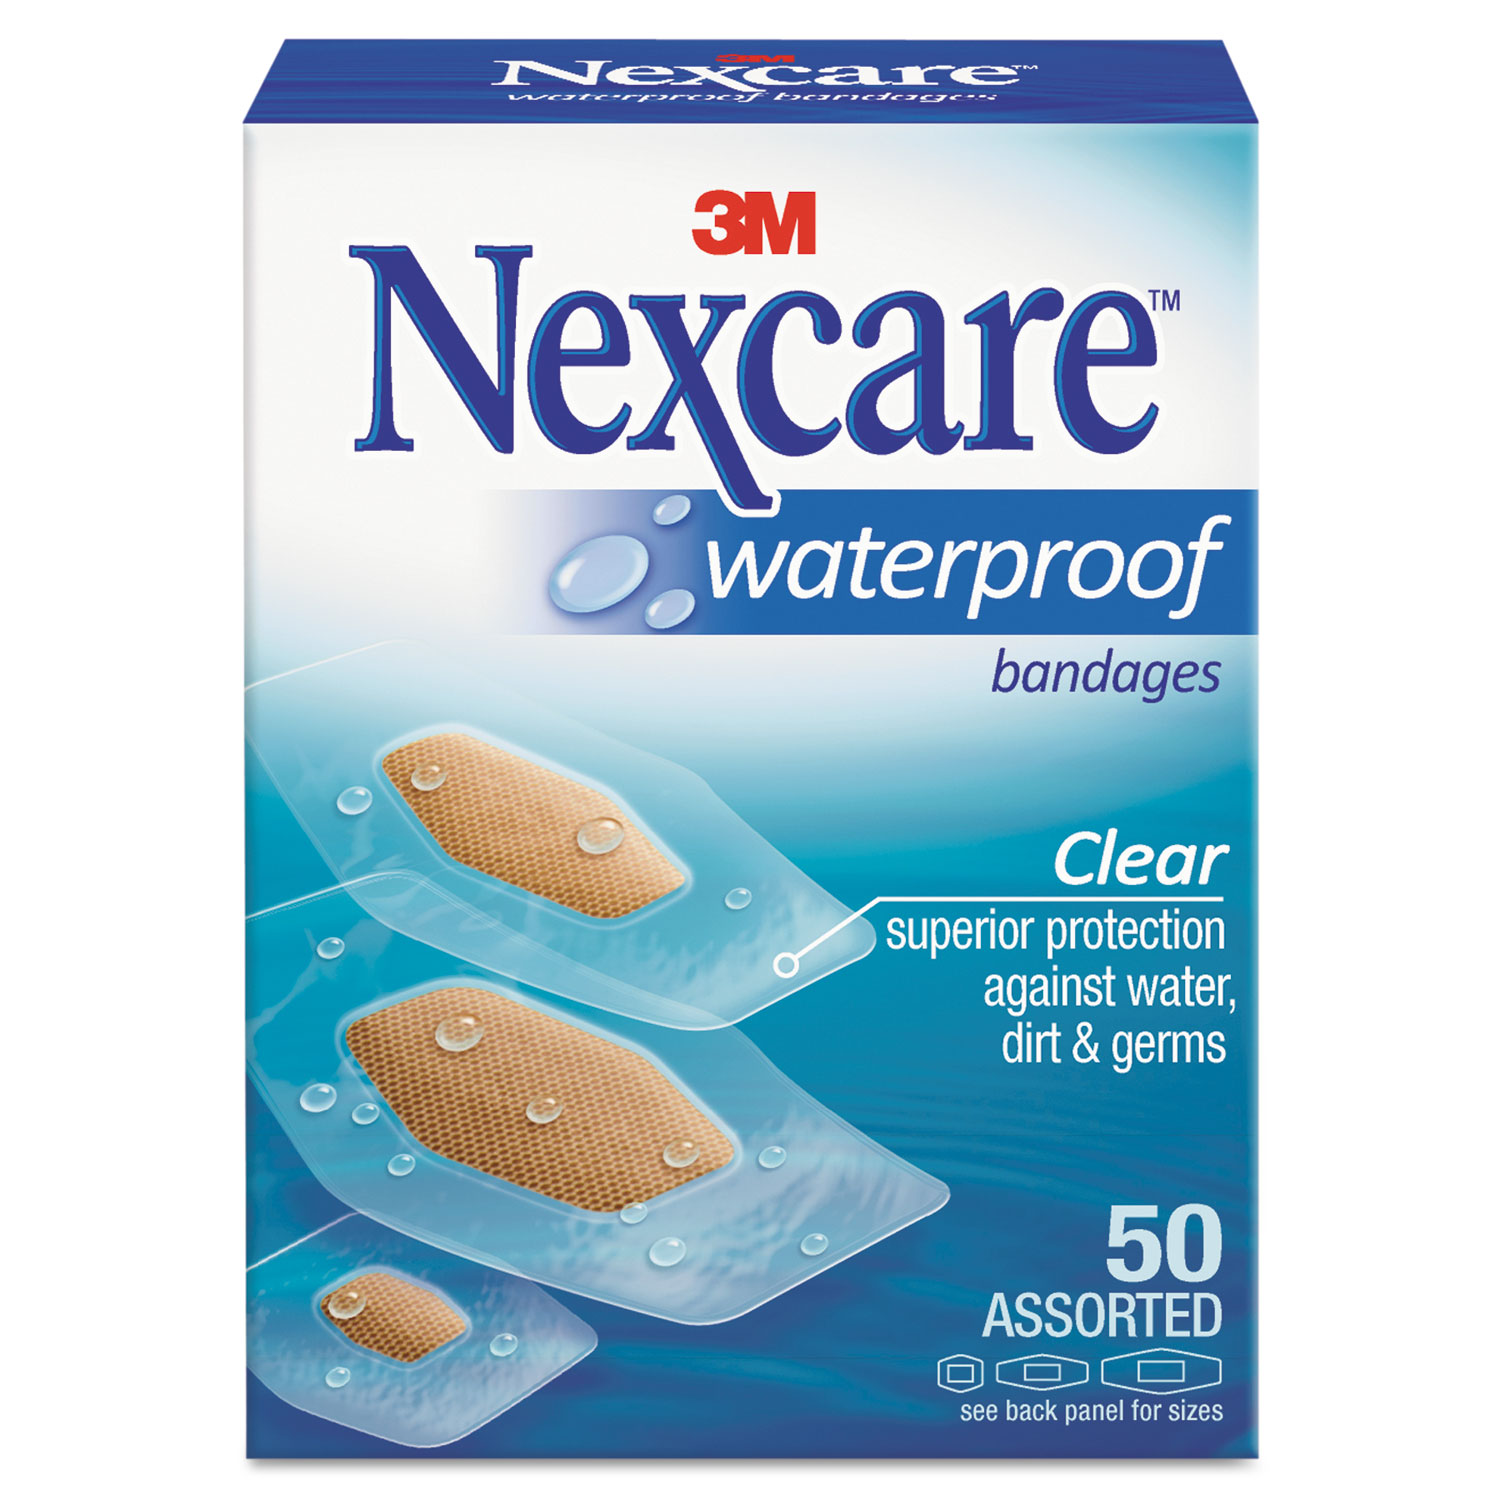  3M Nexcare 432-50-3 Waterproof, Clear Bandages, Assorted Sizes, 50/Box (MMM43250) 